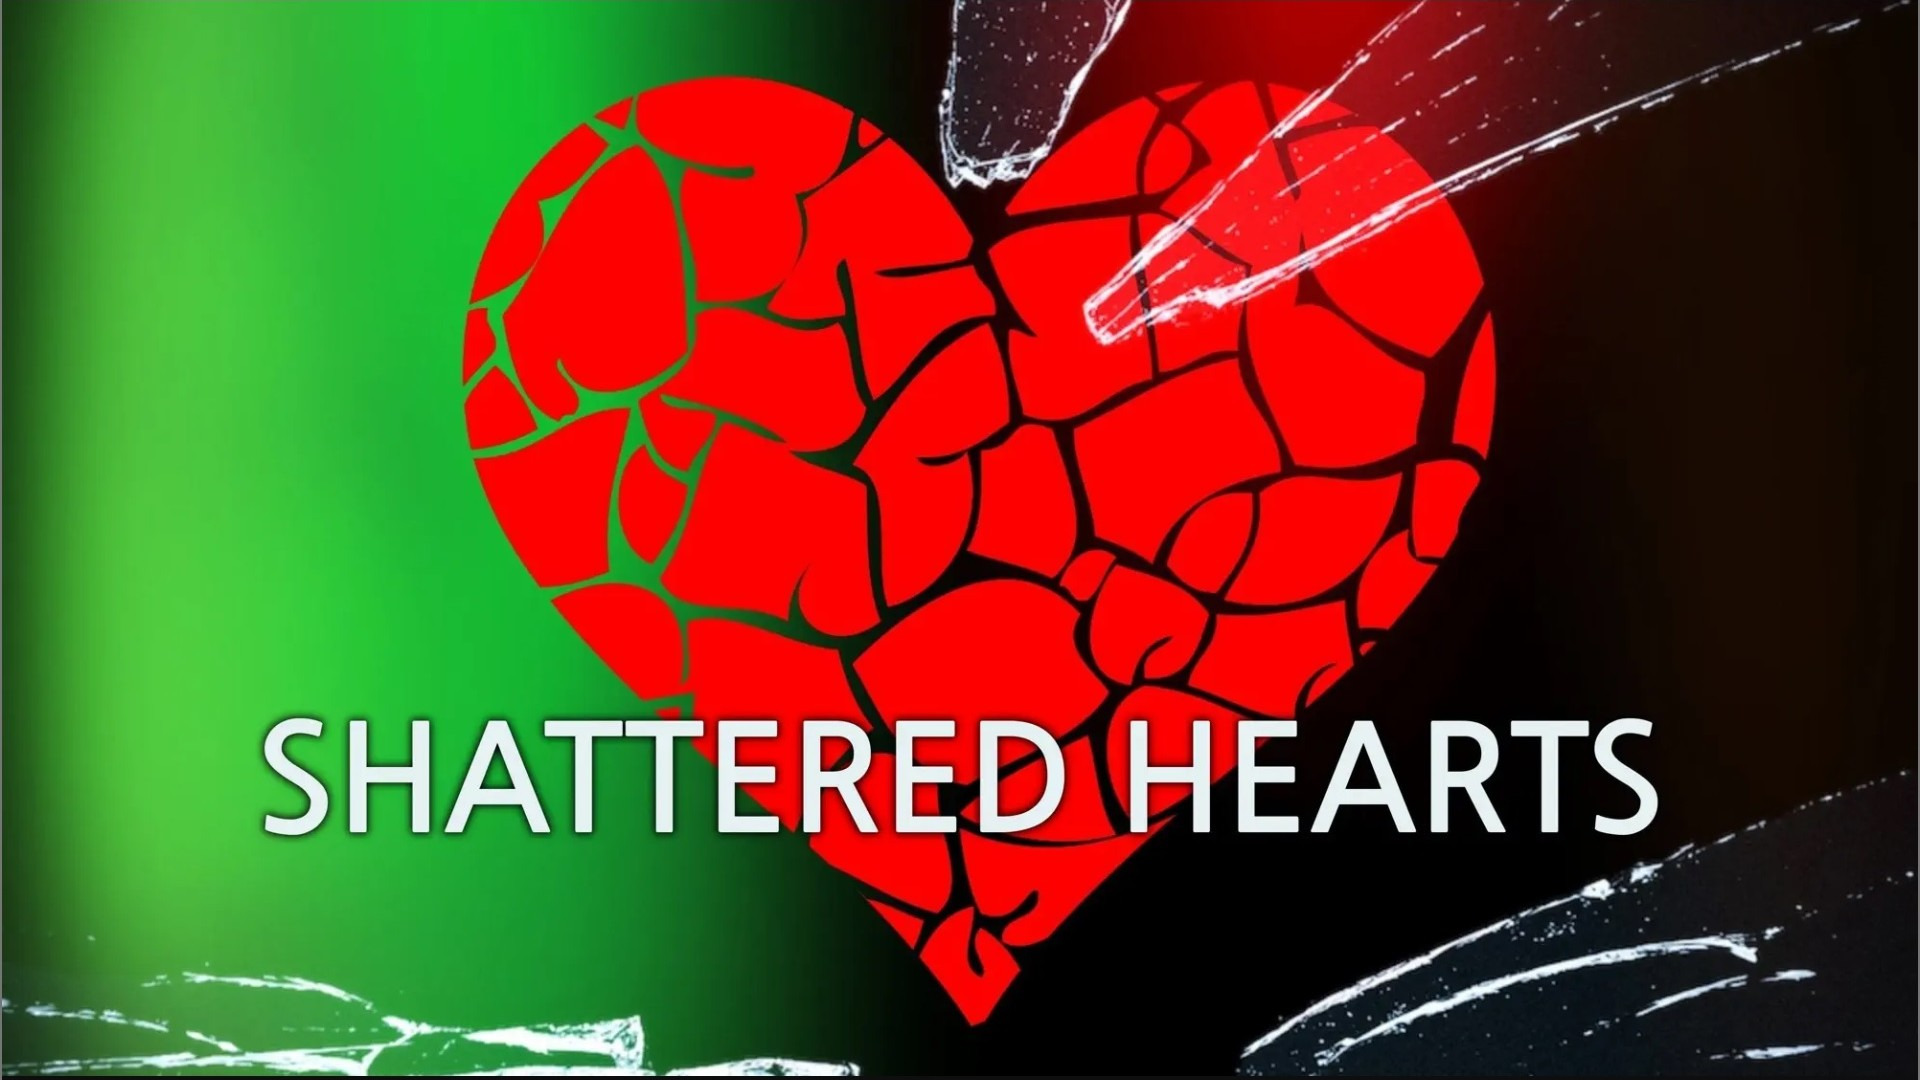 Show Shattered Hearts